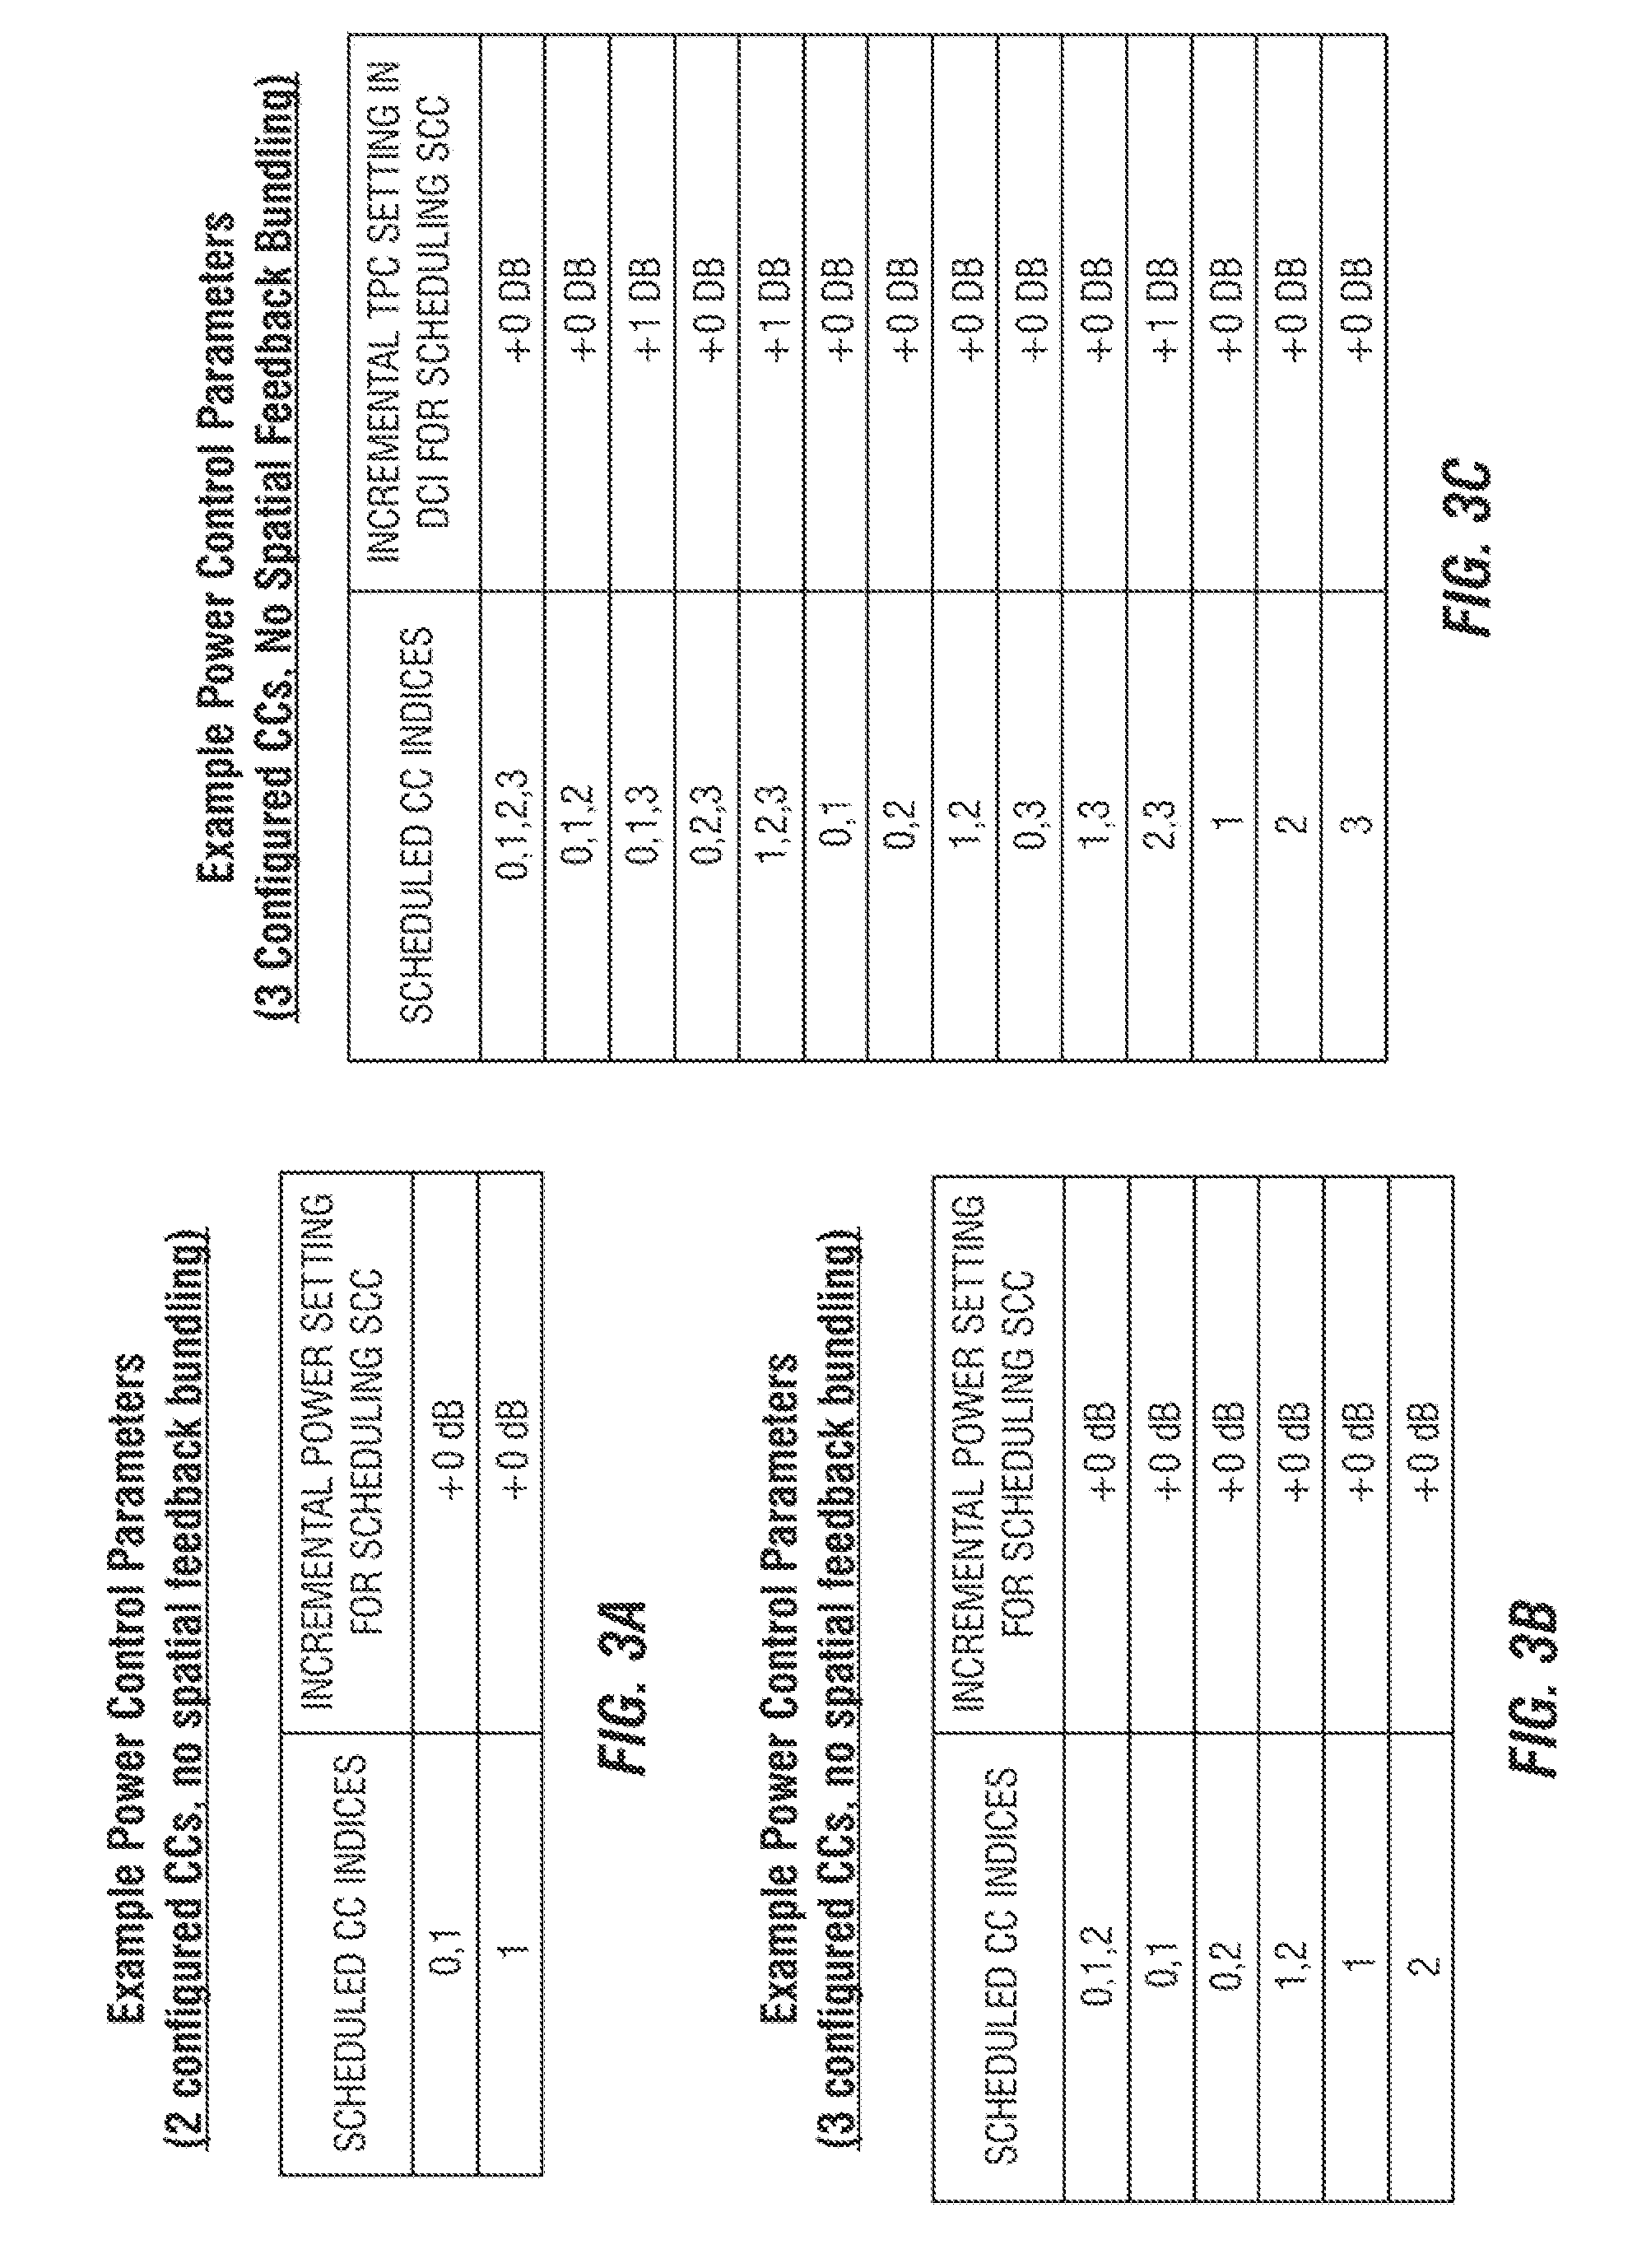 System and method for signaling control information in a mobile communication network